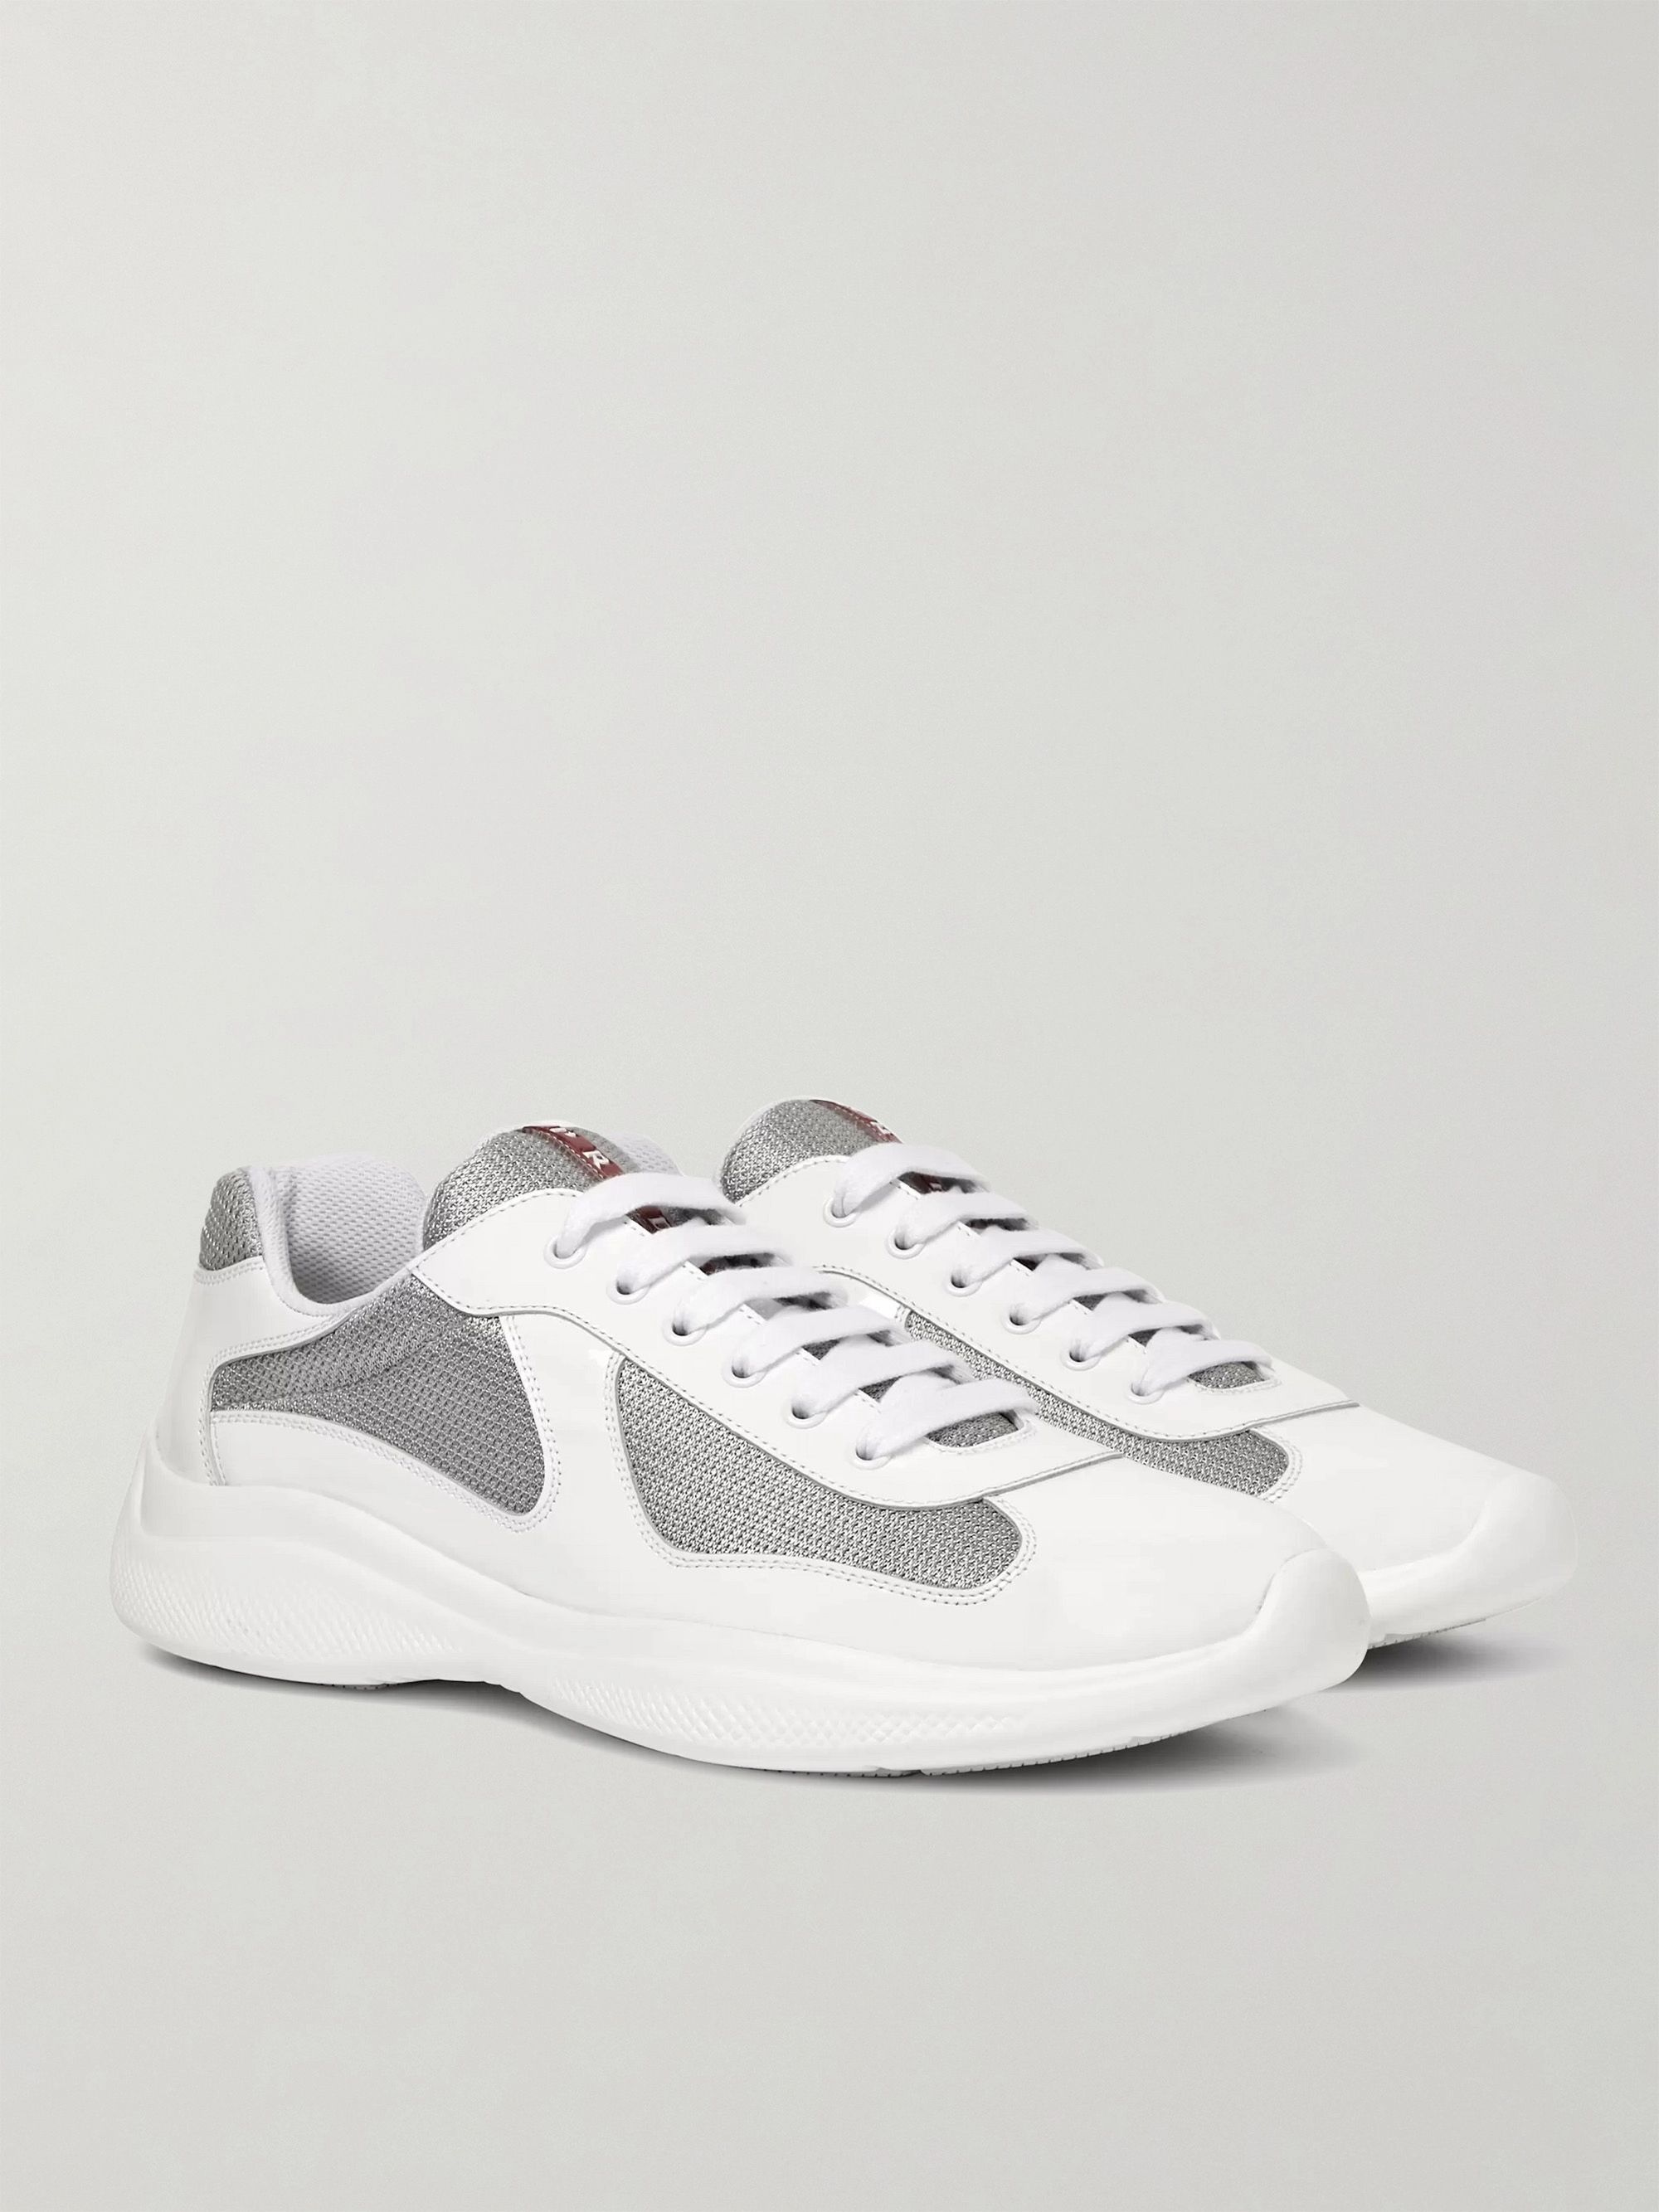 White America S Cup Patent Leather And Mesh Sneakers Prada Mr